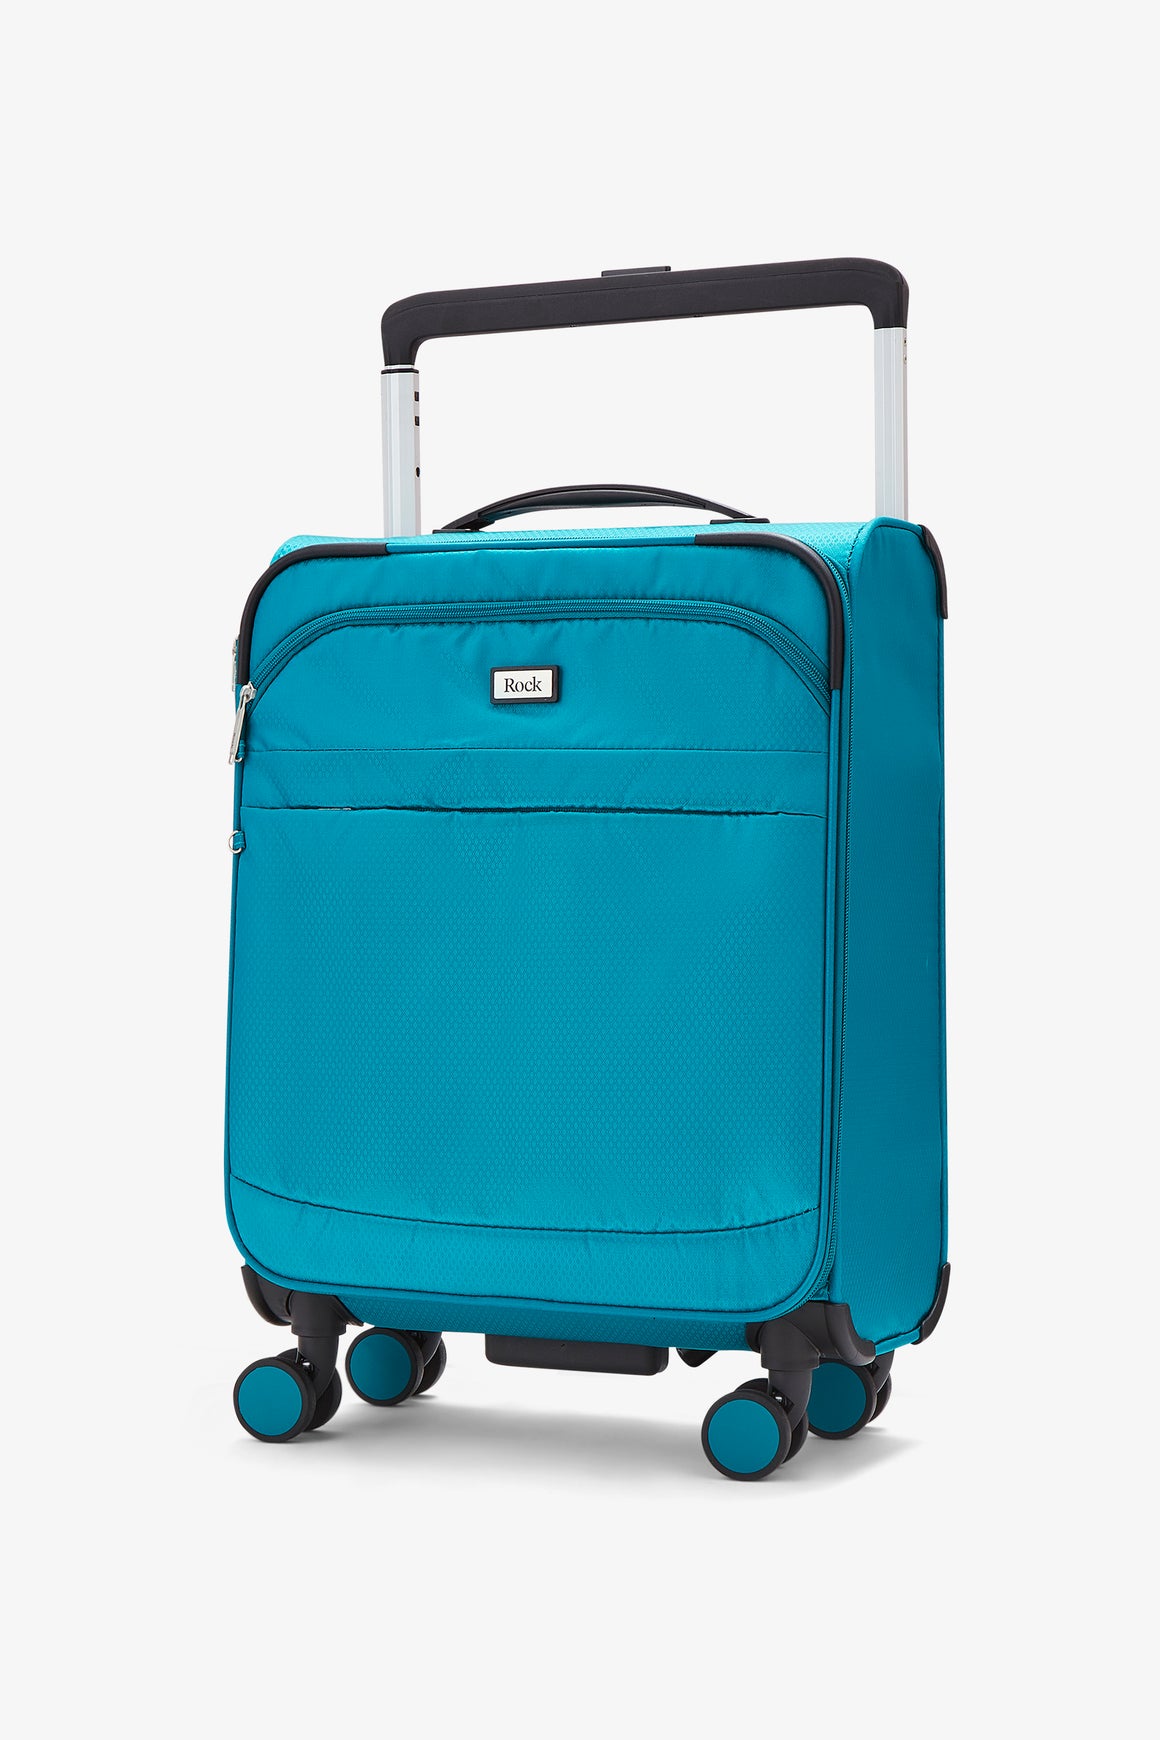 Rocklite Small Suitcase in Teal